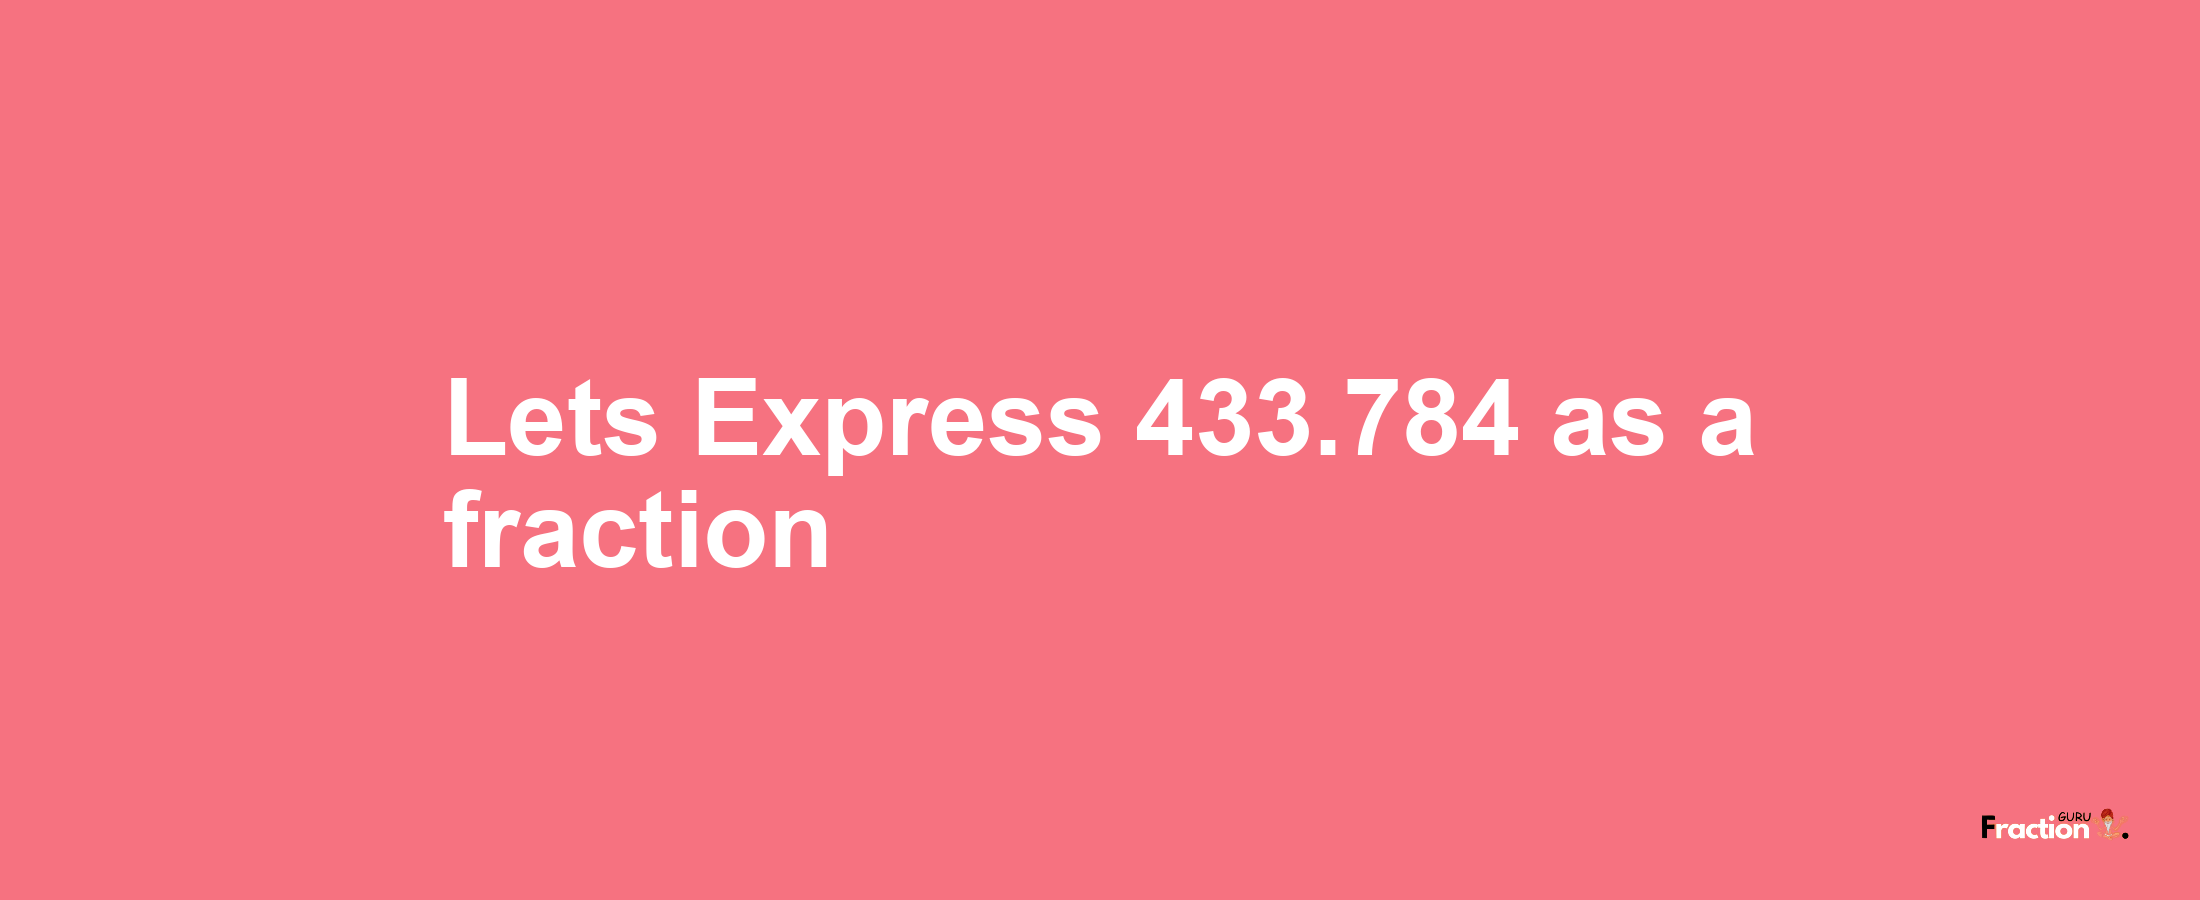 Lets Express 433.784 as afraction